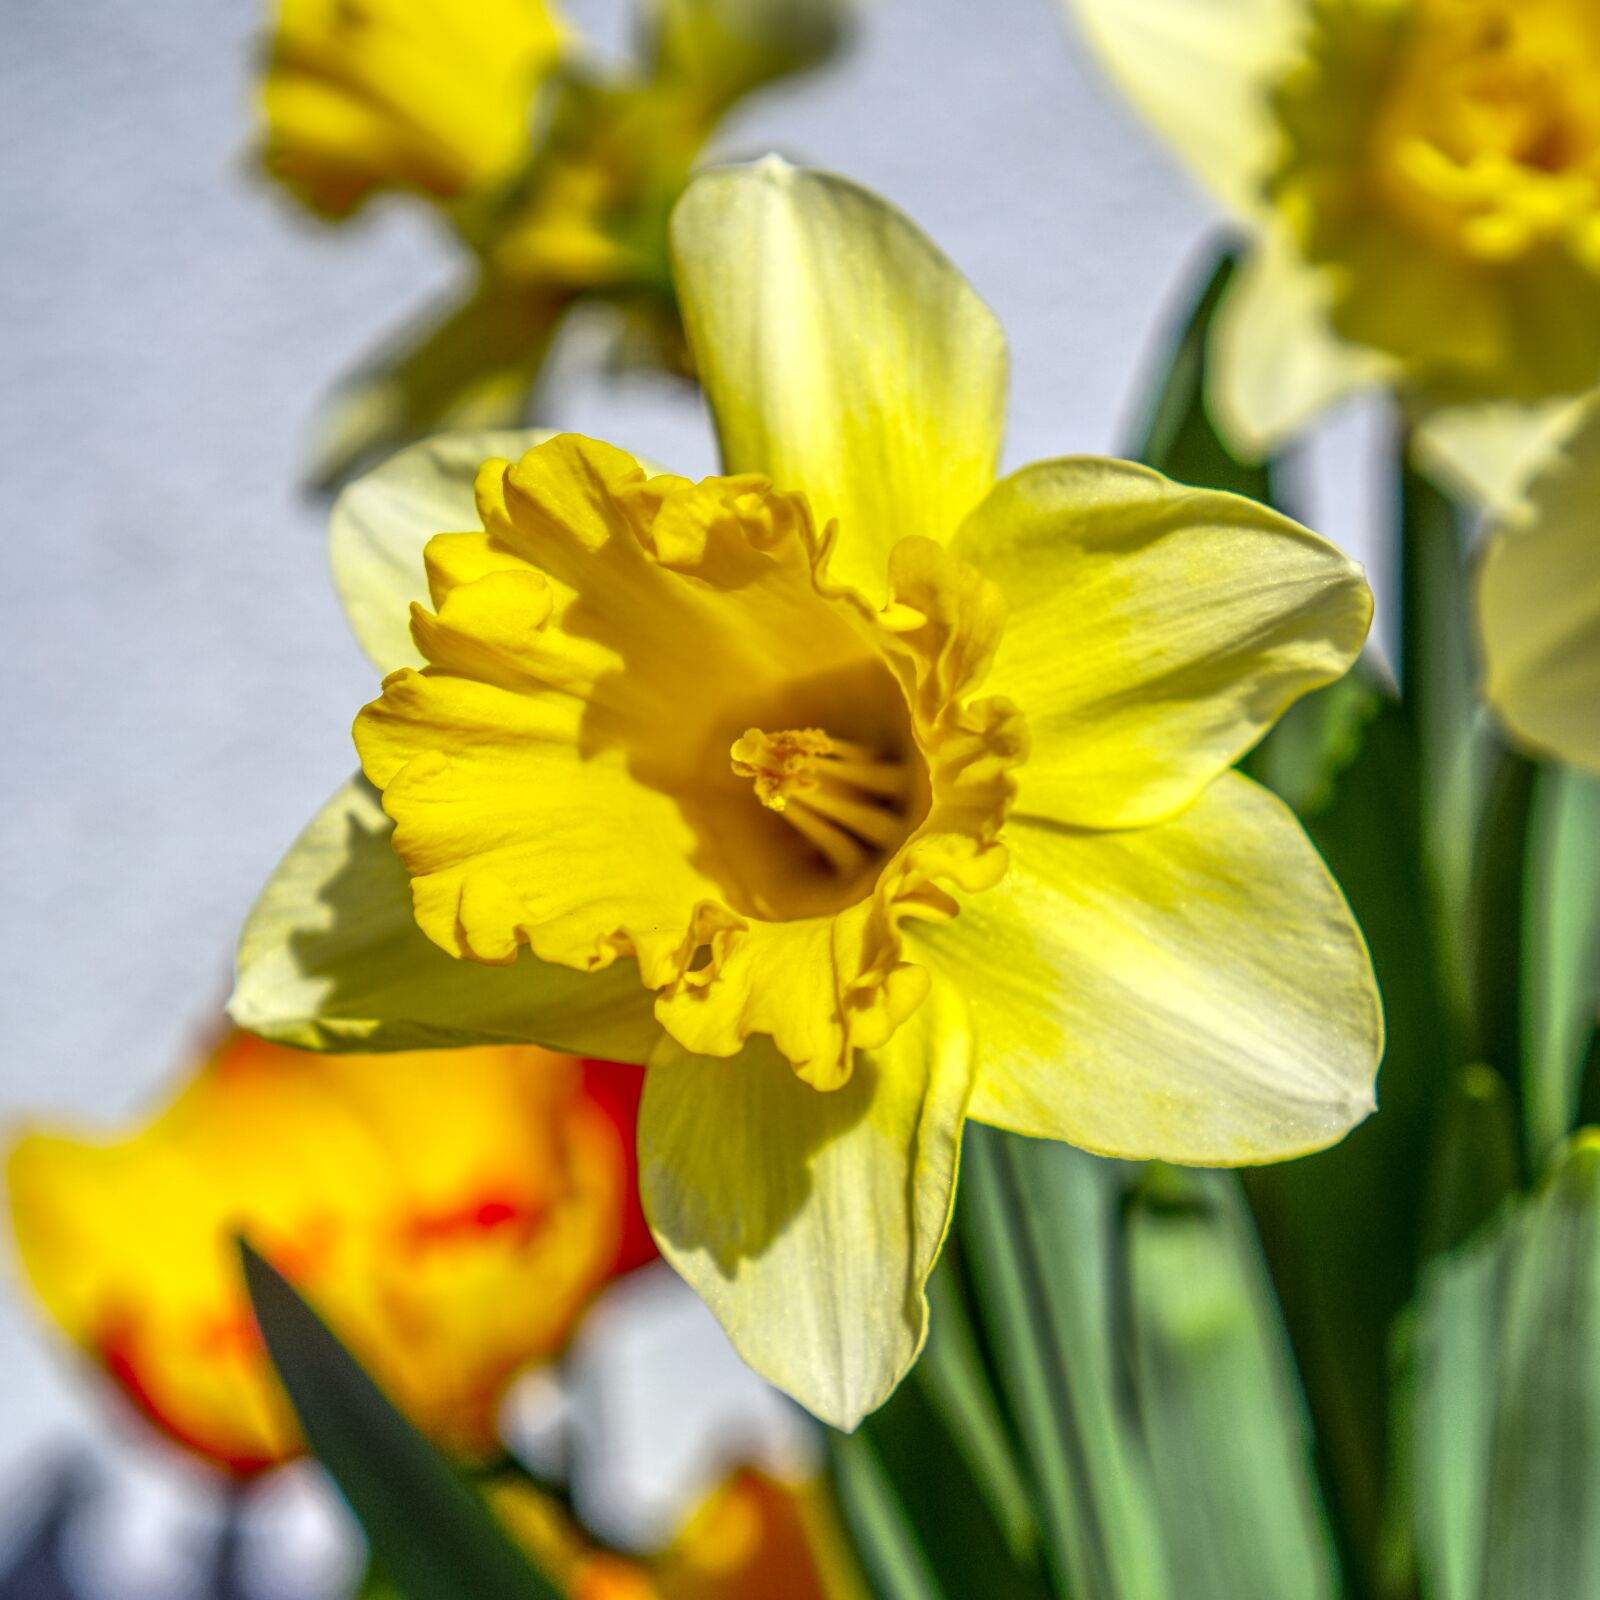 Sony a6000 sample photo. Flower, narcissus, narcissus pseudonarcissus photography